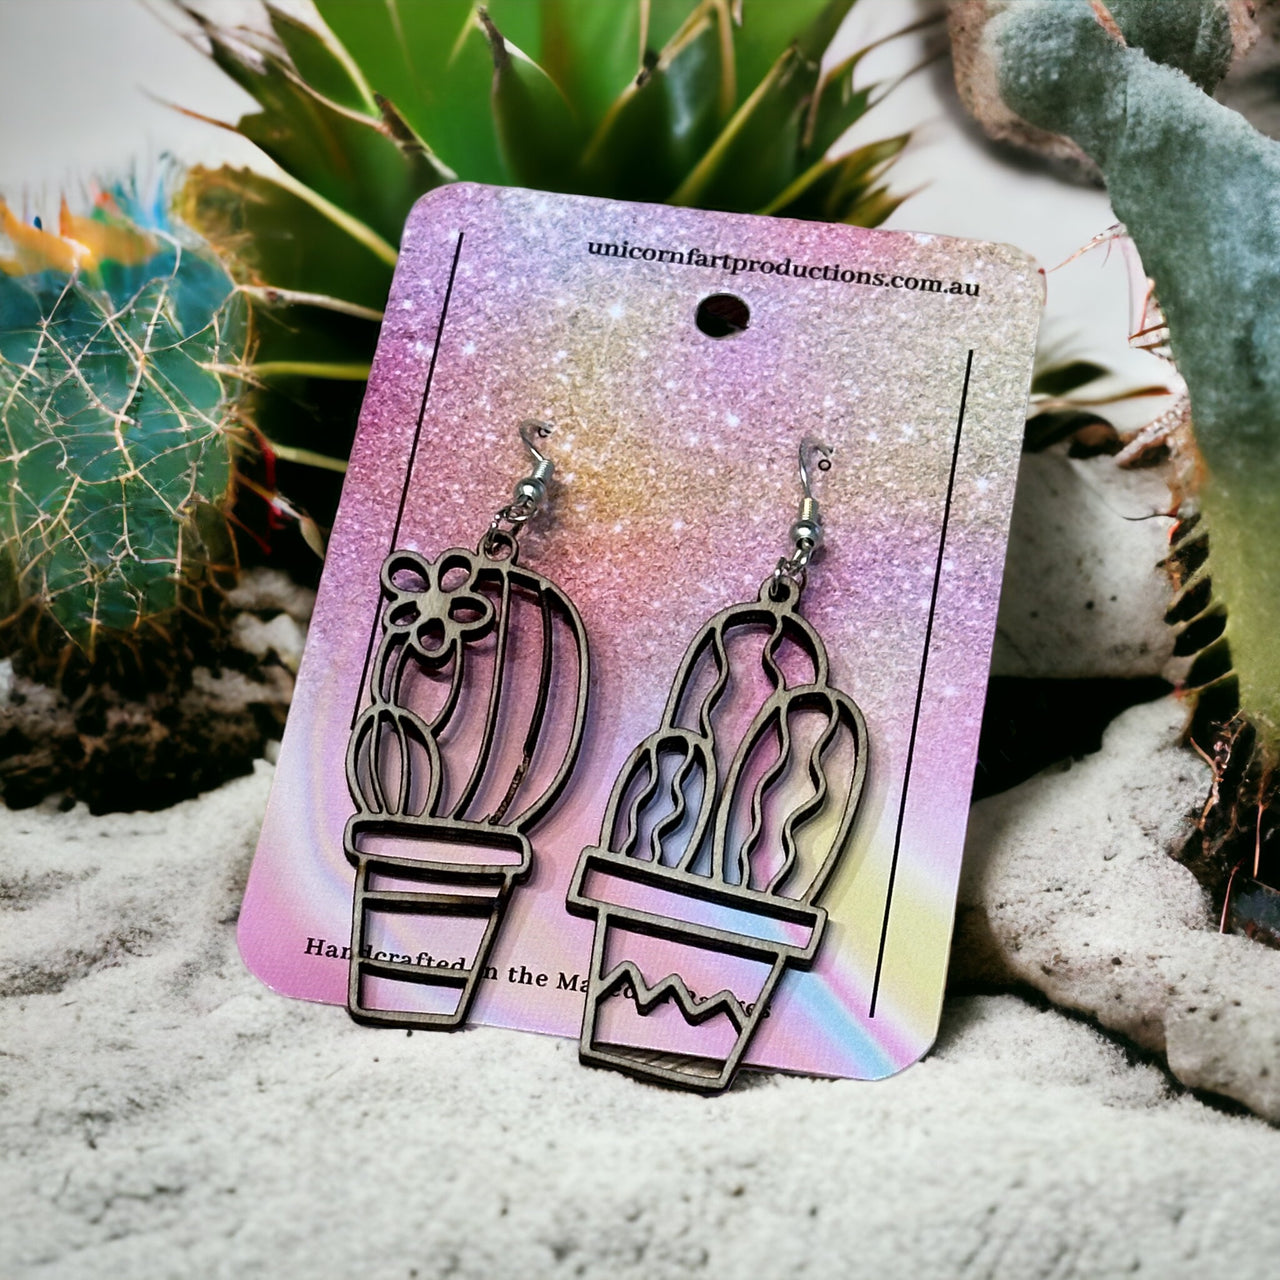 Wooden Handmade earrings crafted from sustainable timber - Cactus 3